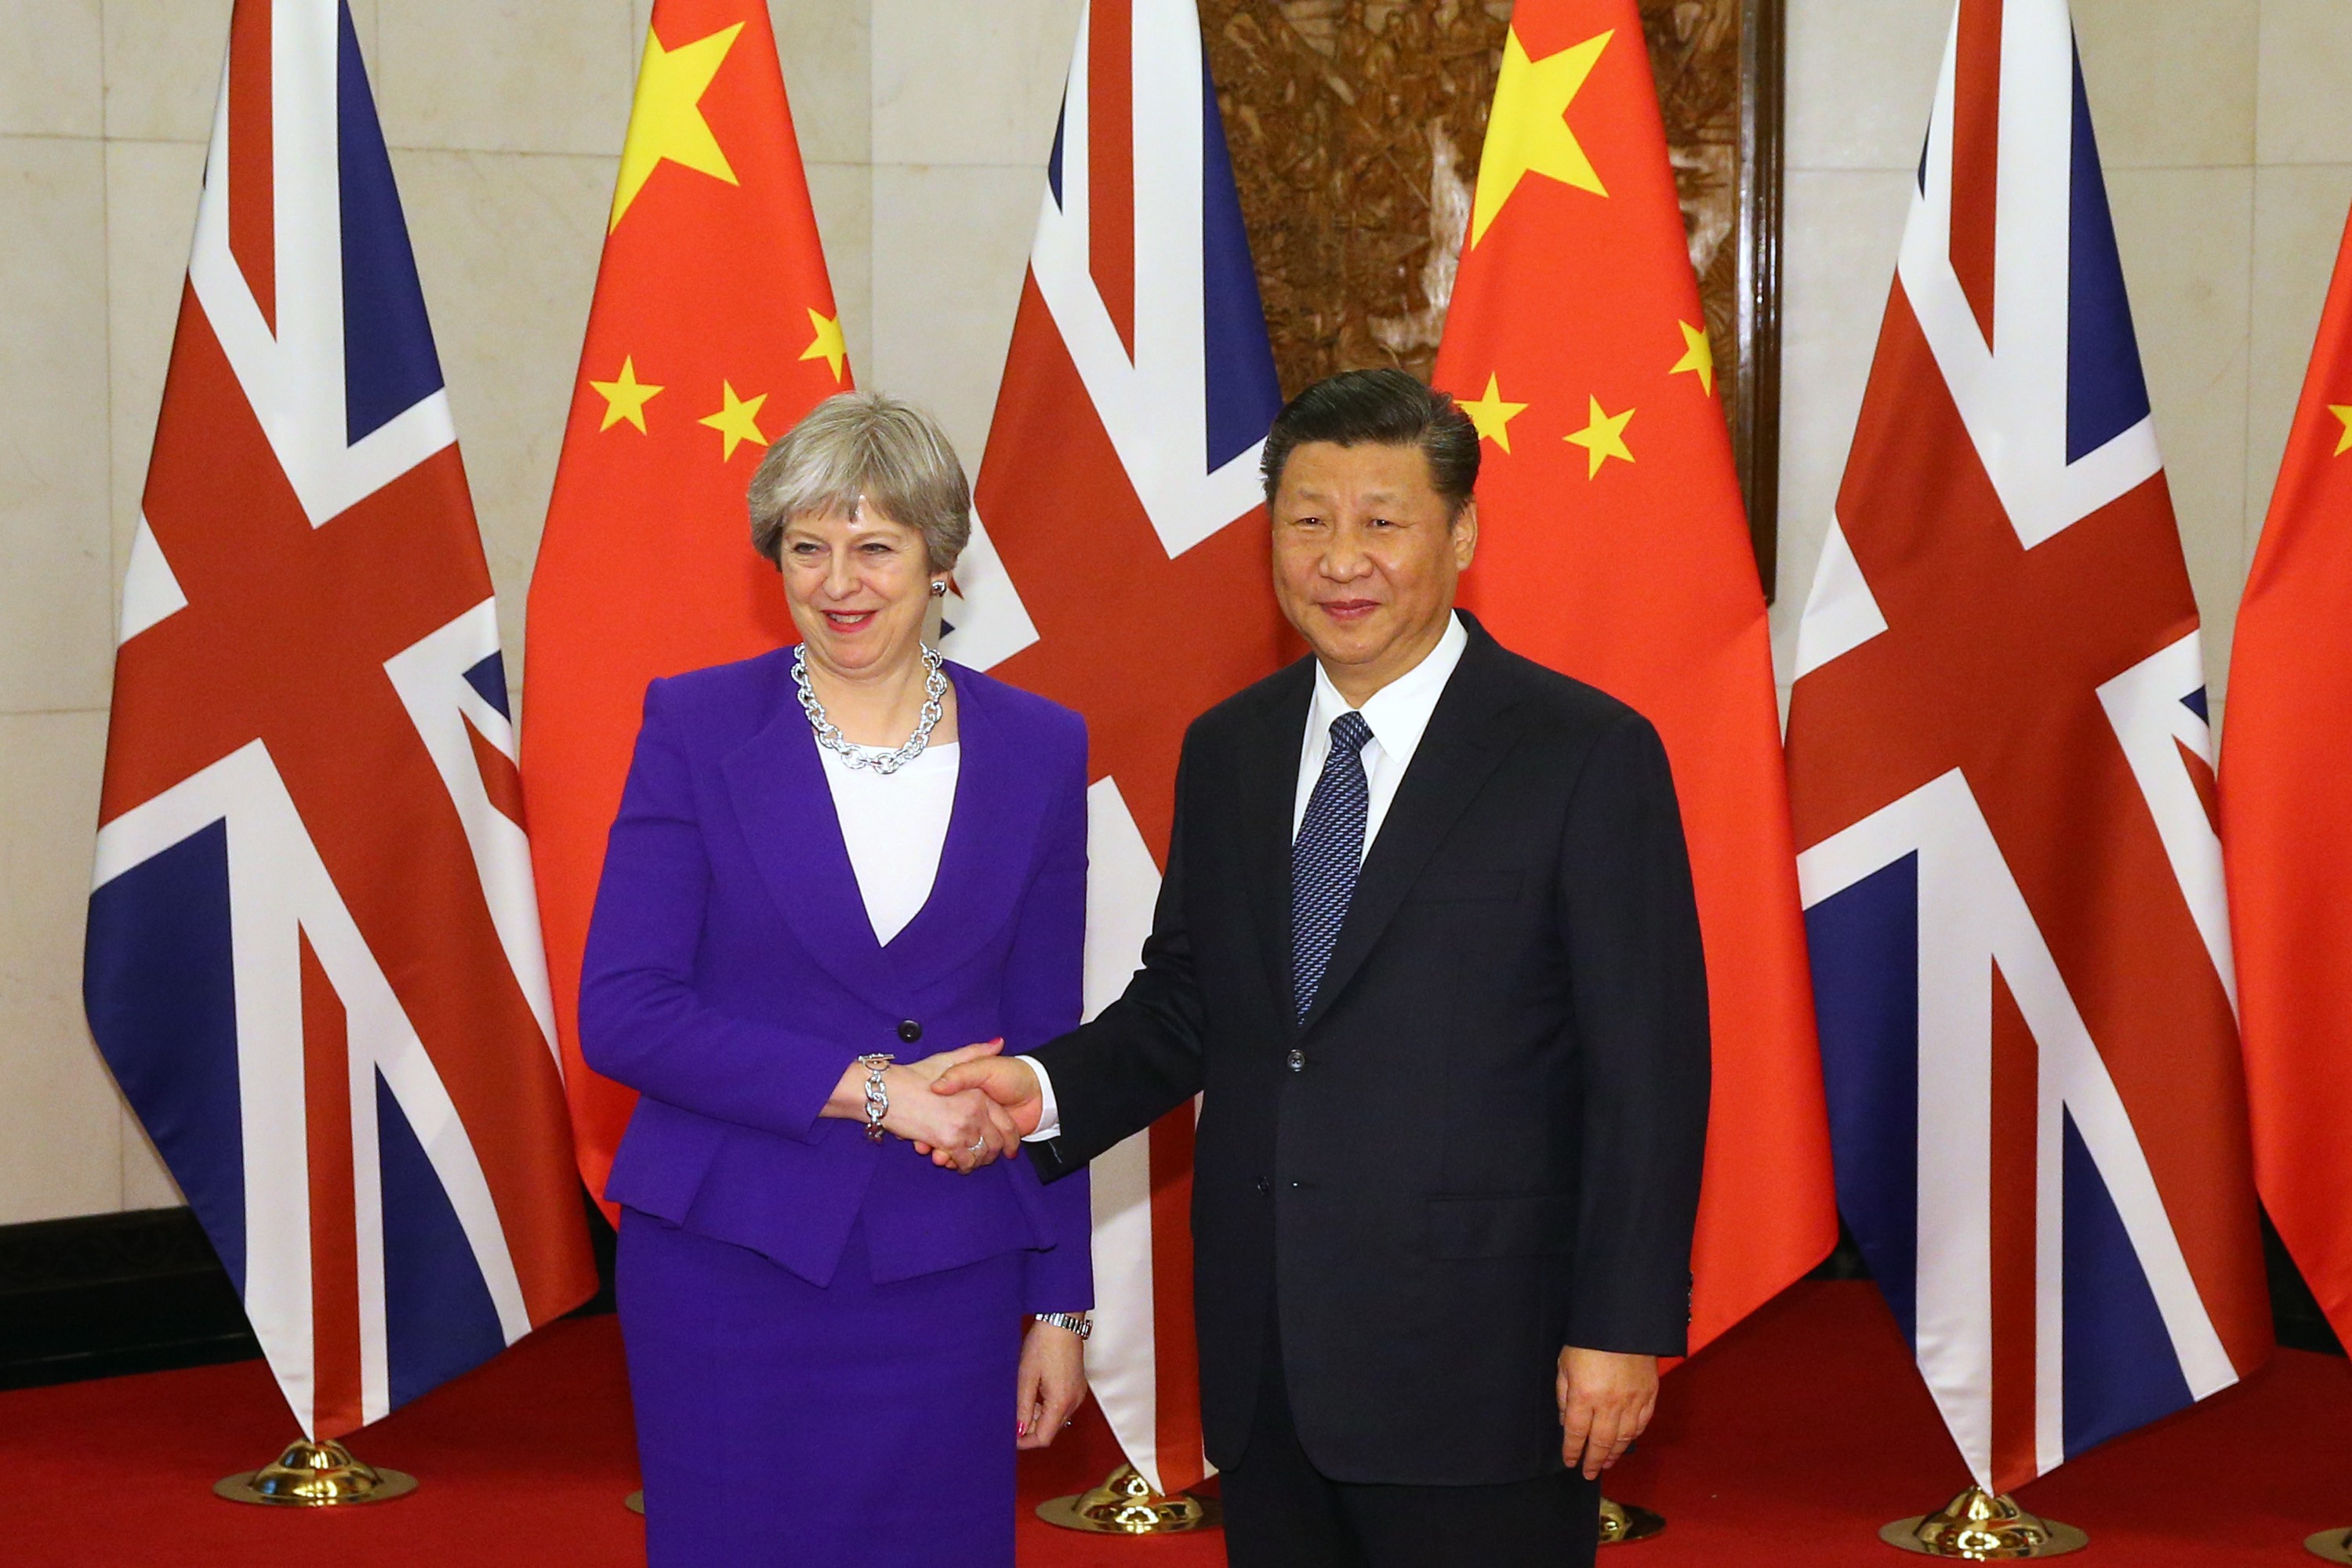 Chinese President Xi Jinping shakes hands with Britain's Prime Minister Theresa May ahead of their meeting at the Diaoyutai State Guesthouse in Beijing on February 1, 2018. Photo: AFP